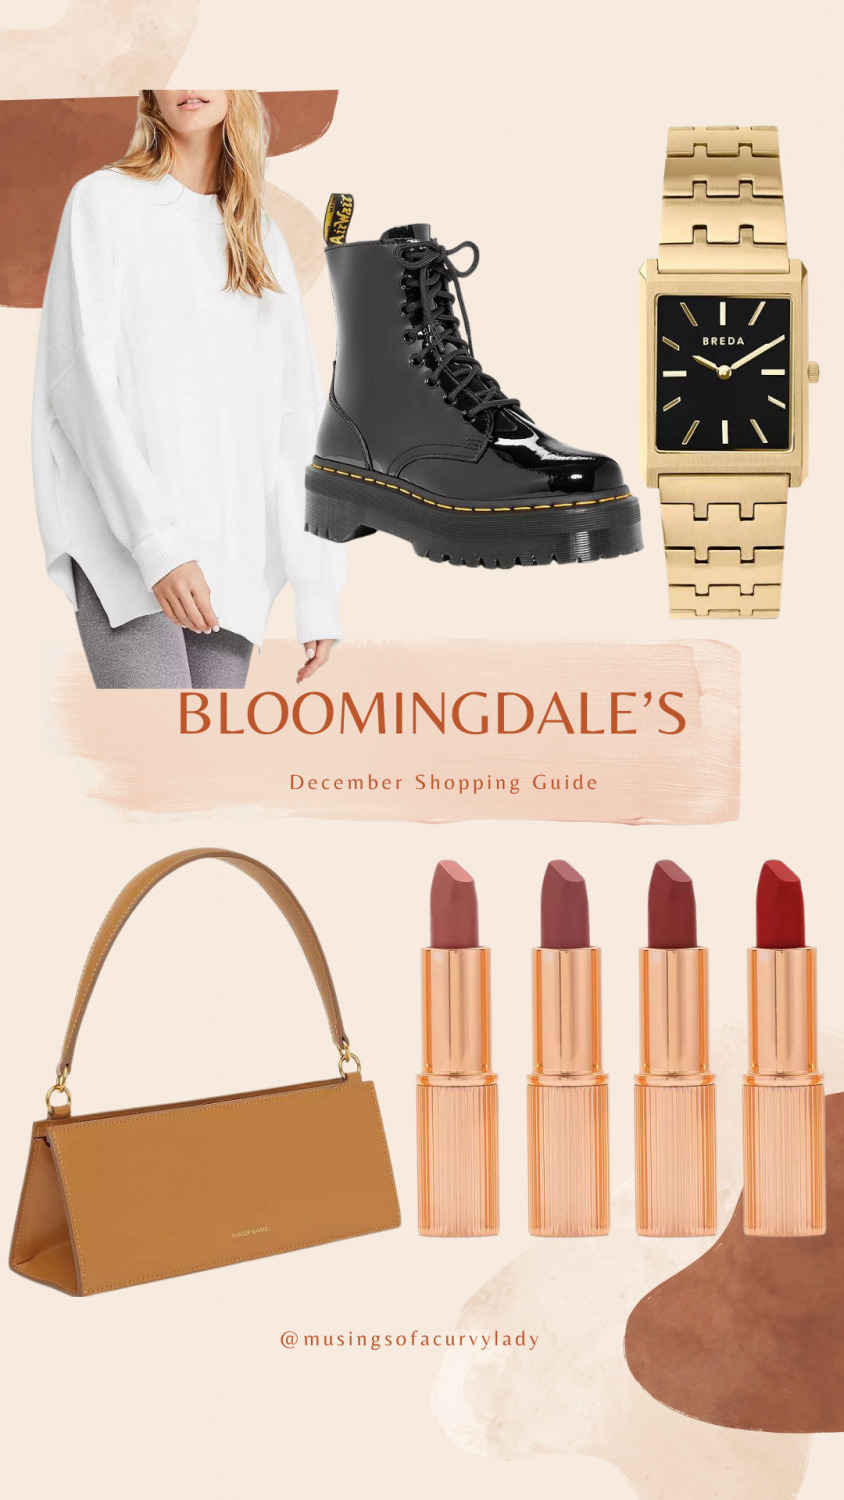 Bloomingdale's Holiday Shopping Guide